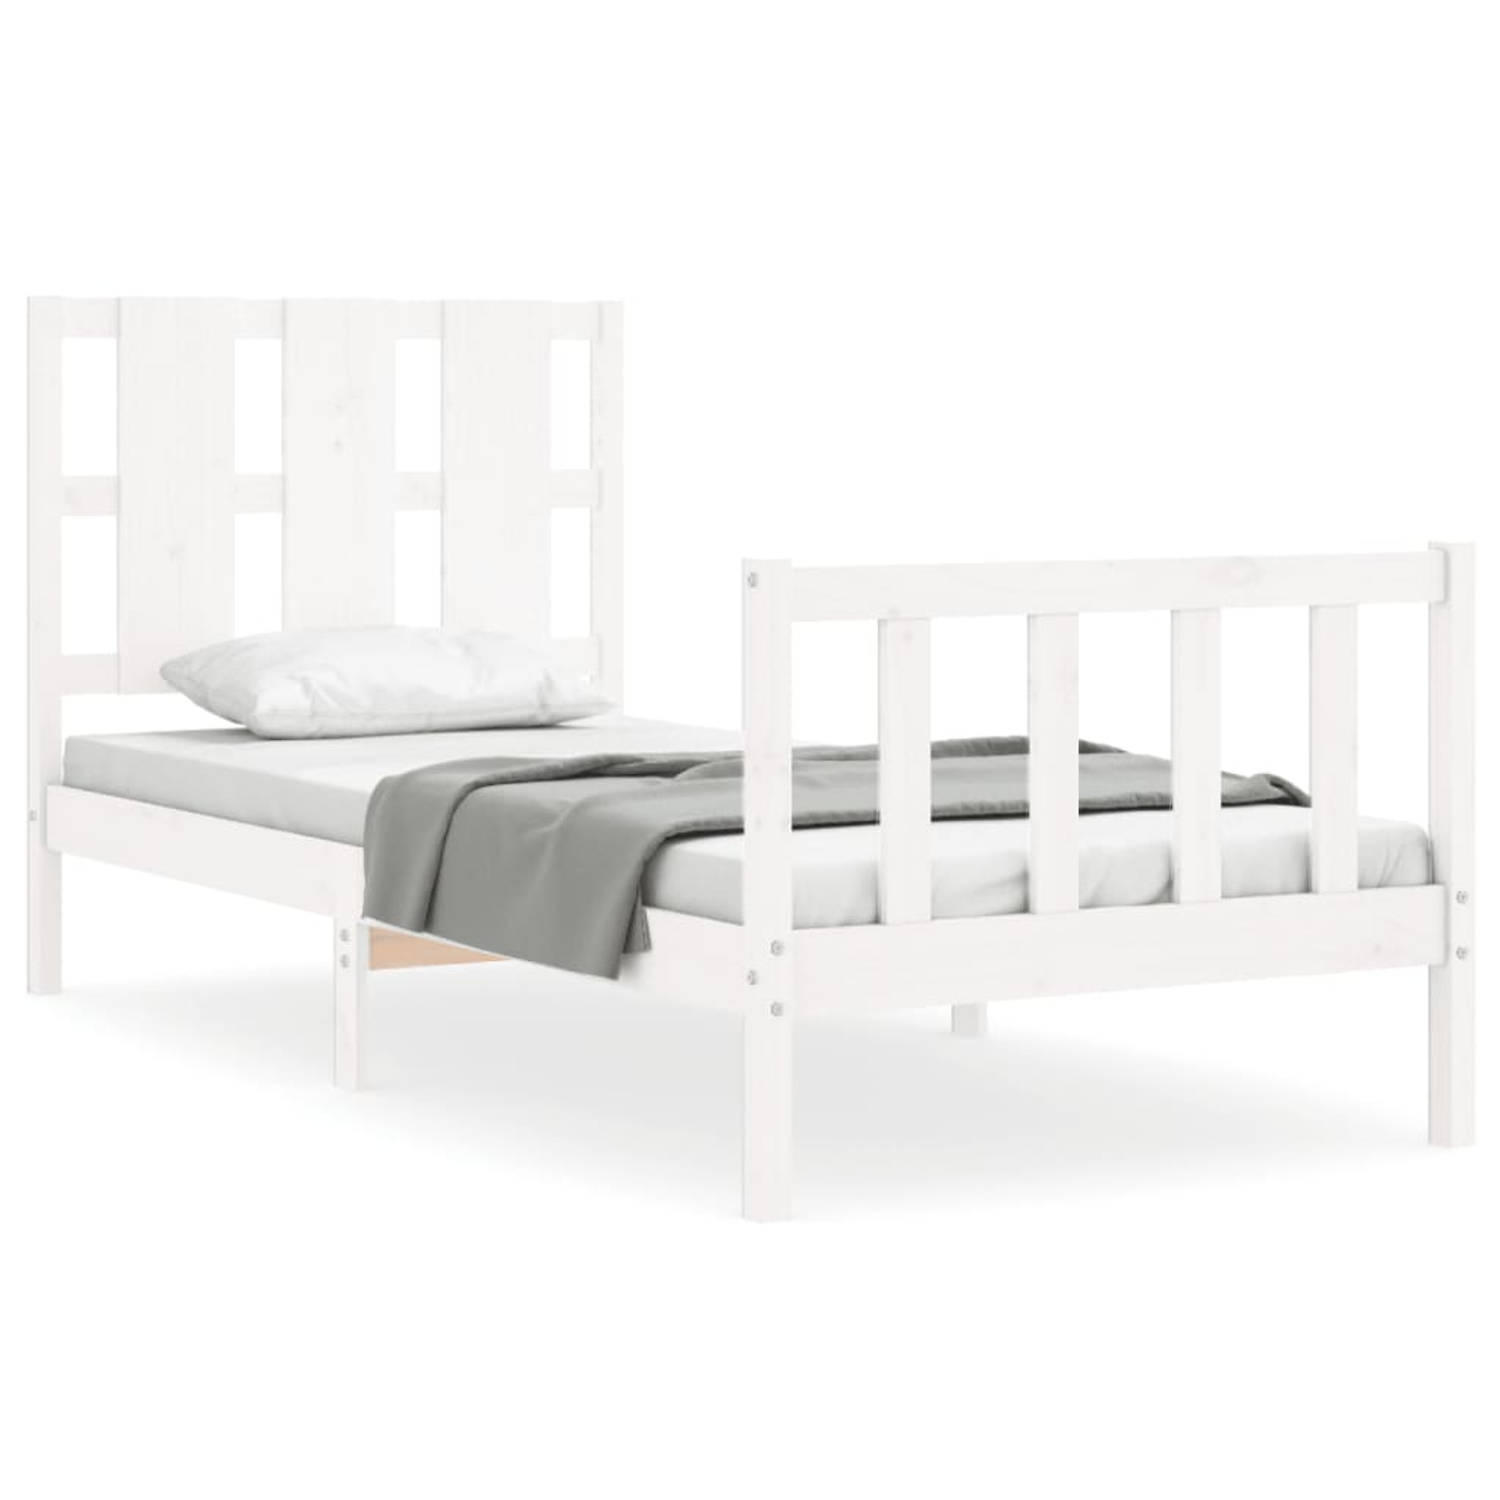 The Living Store Bed The Living Store - Grenenhouten bedframe - 195.5x95.5x100 cm - wit